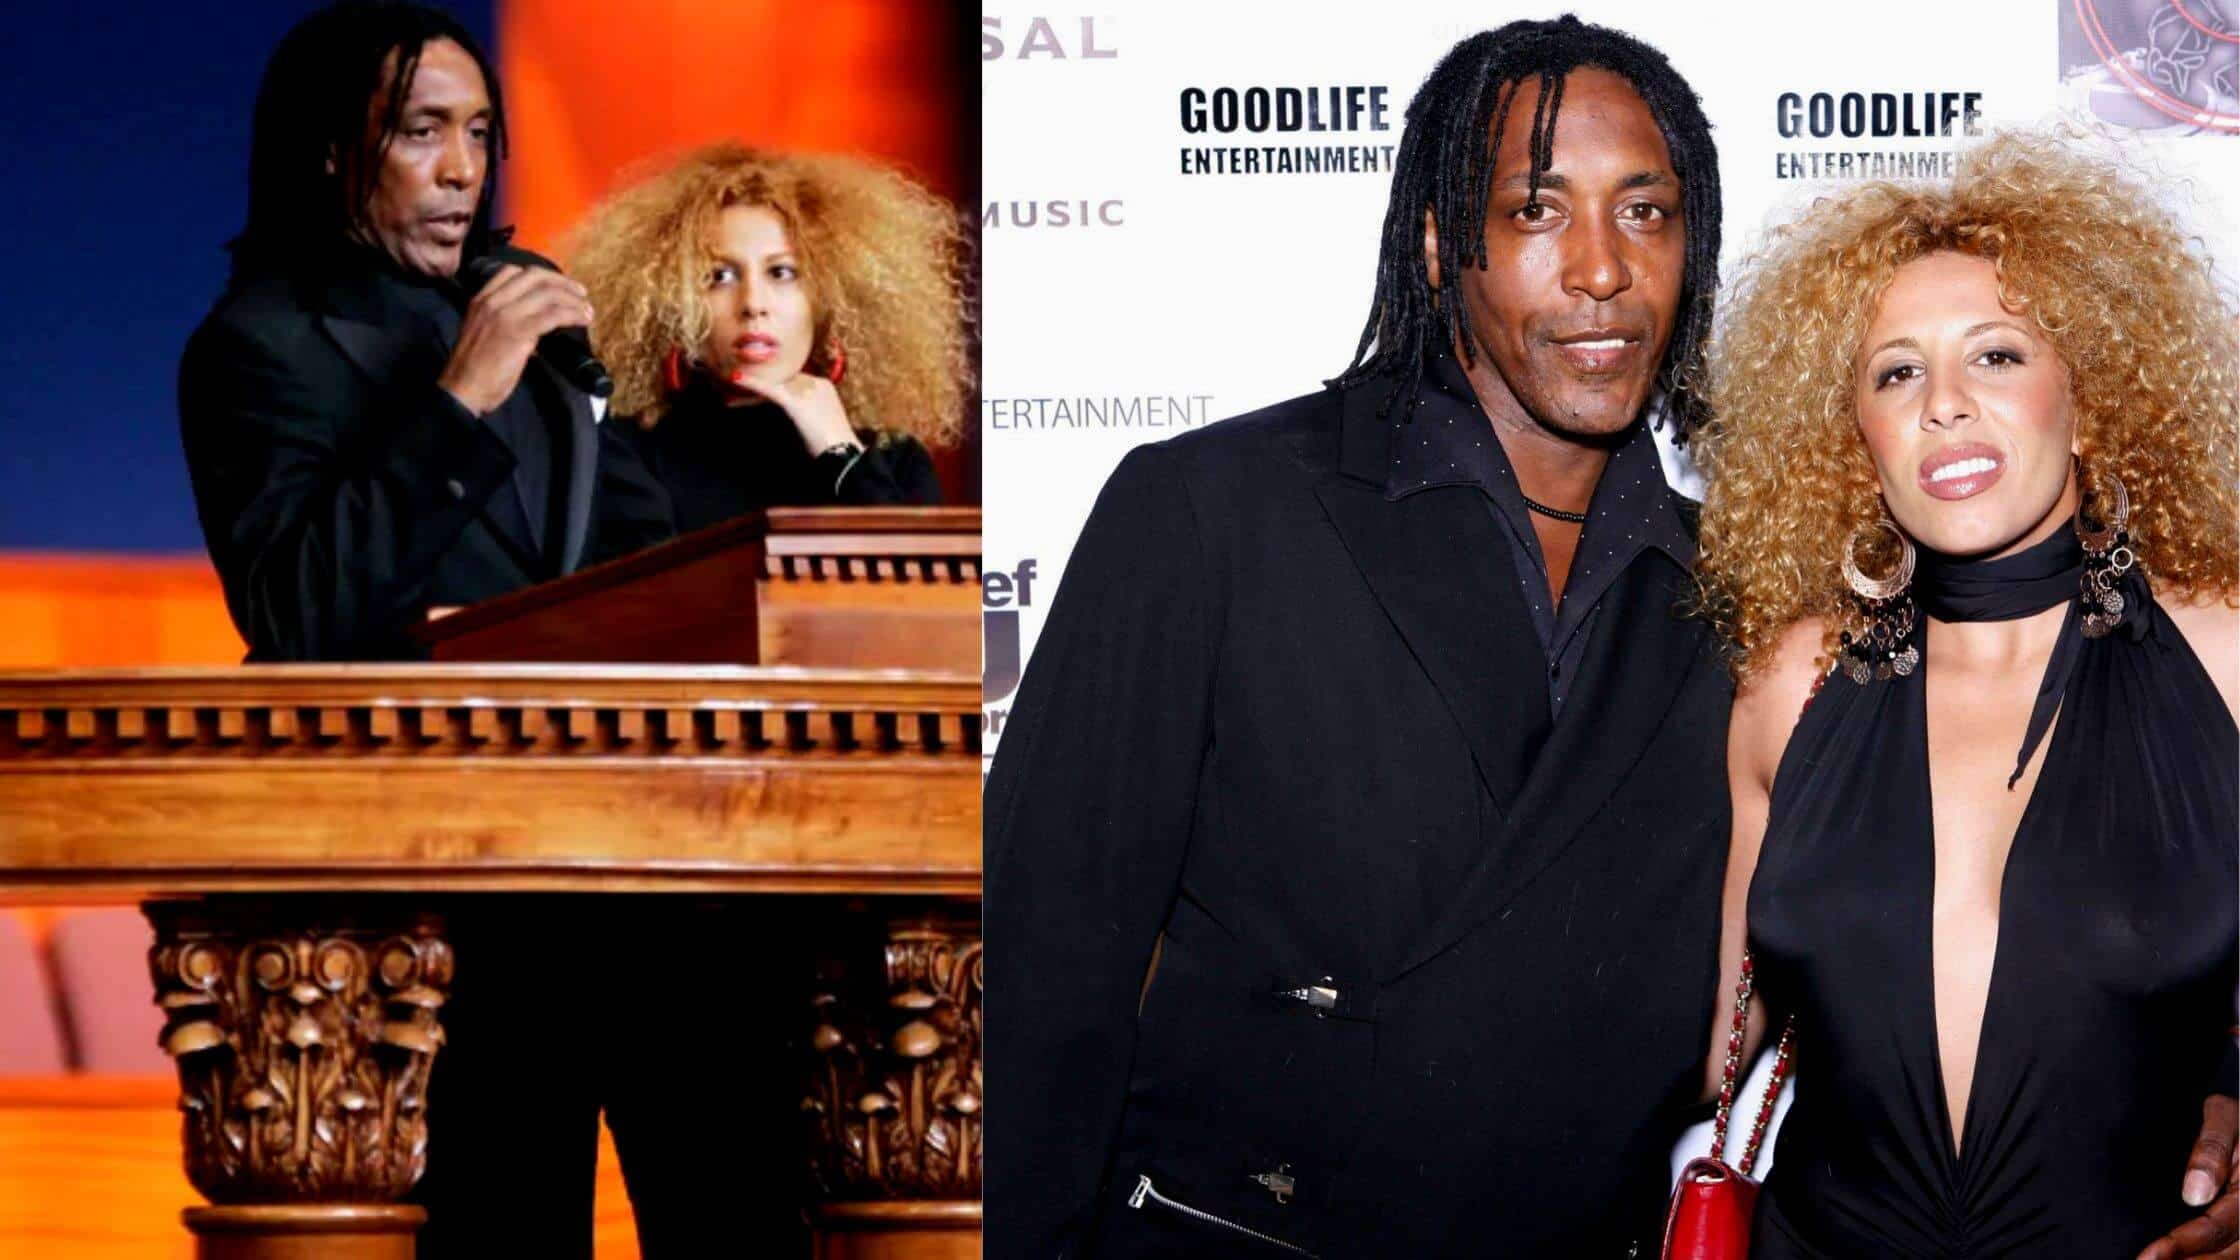 Ronnie Turner Died At 62: "You Left The World Far Too Early" Tina Turner Mourns